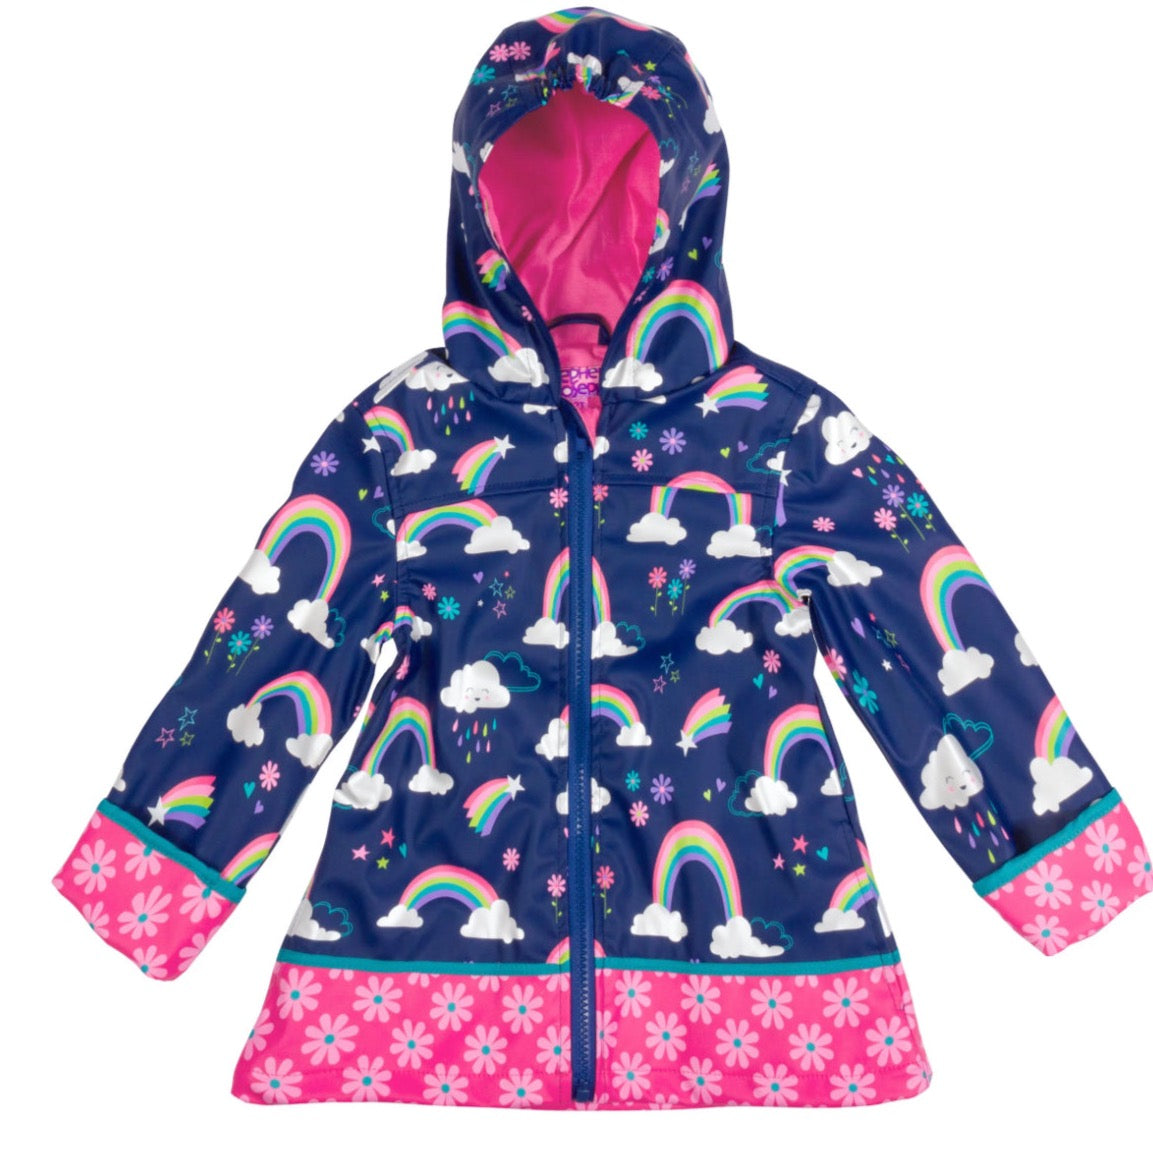 A Stephen Joseph waterproof raincoat with blue rainbows and clouds.